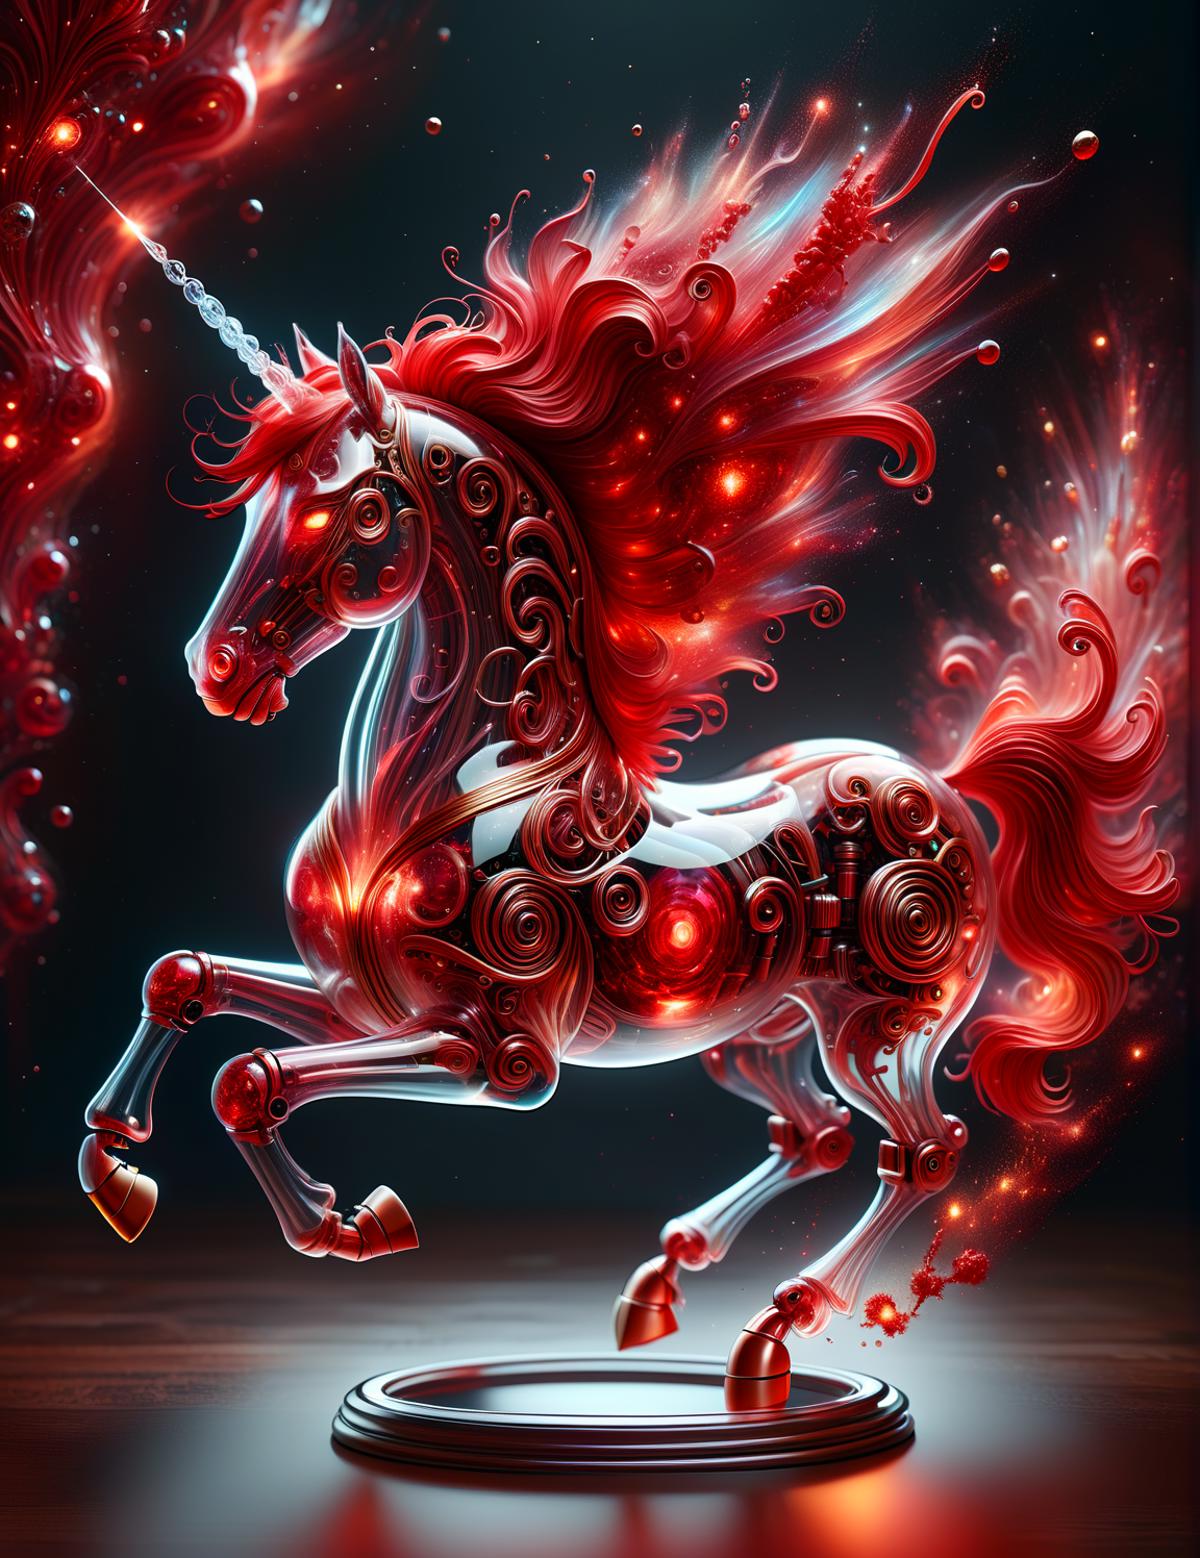 A red and white unicorn with an orange mane standing on a blue base.